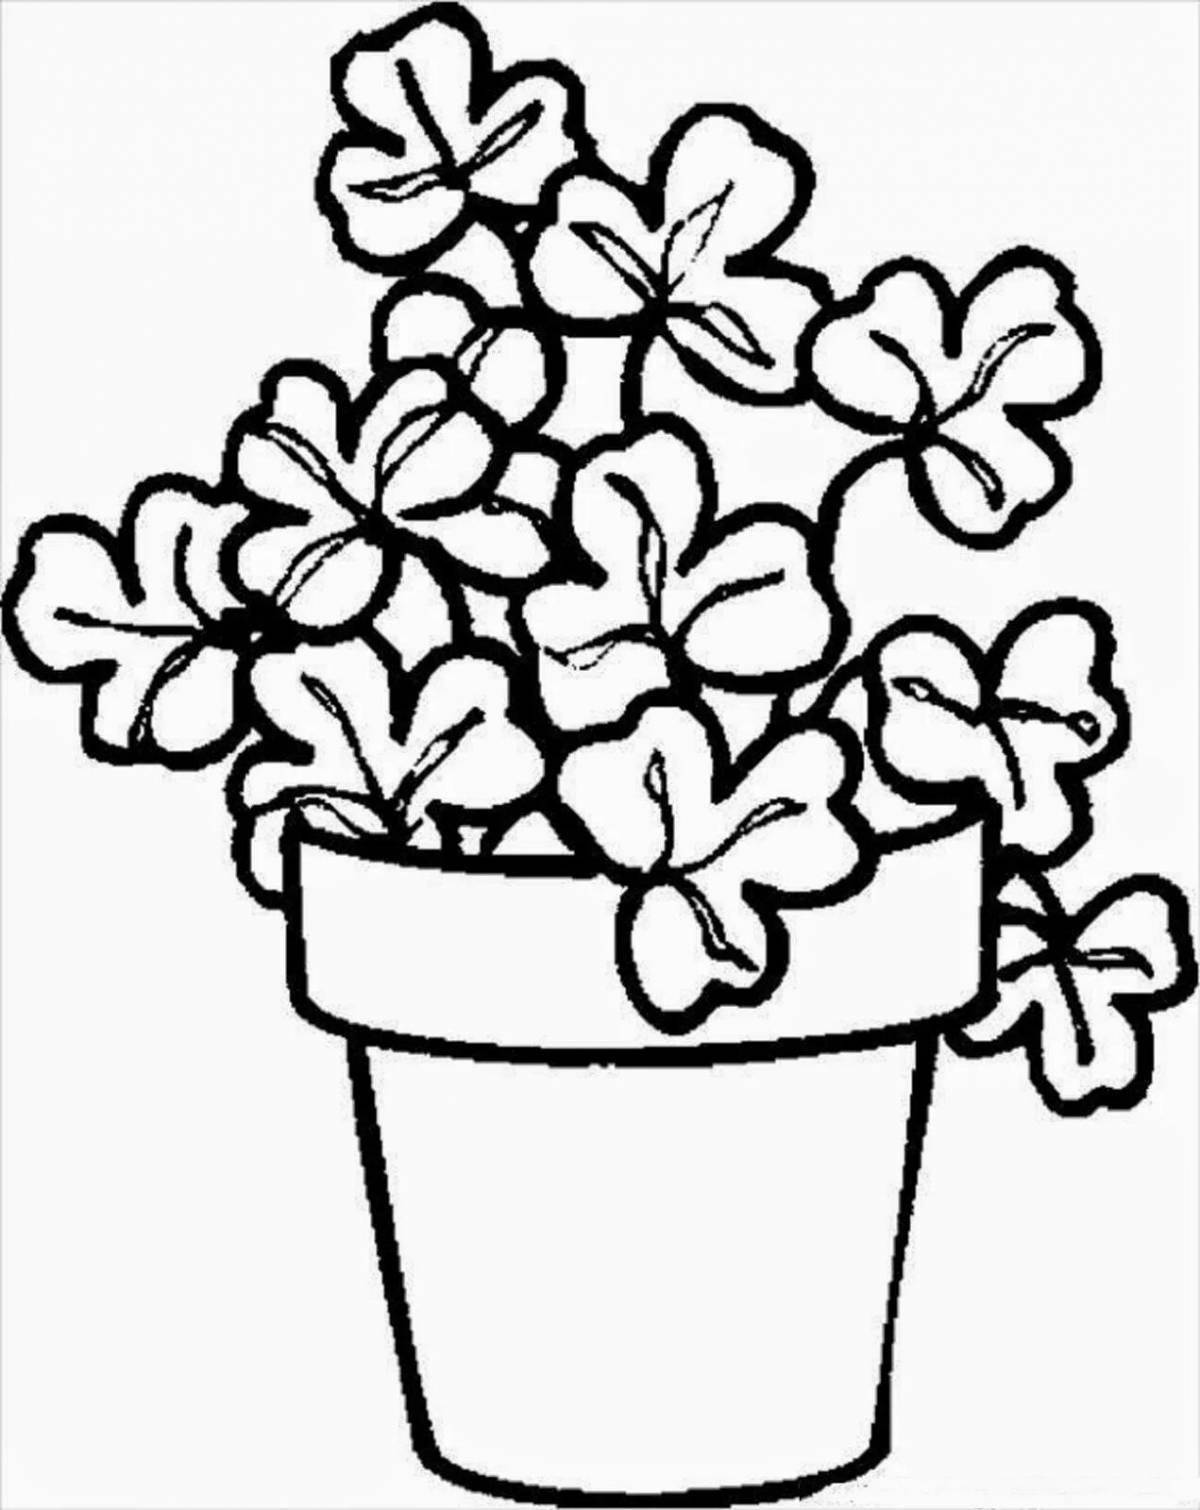 Funny houseplant coloring book for 6-7 year olds